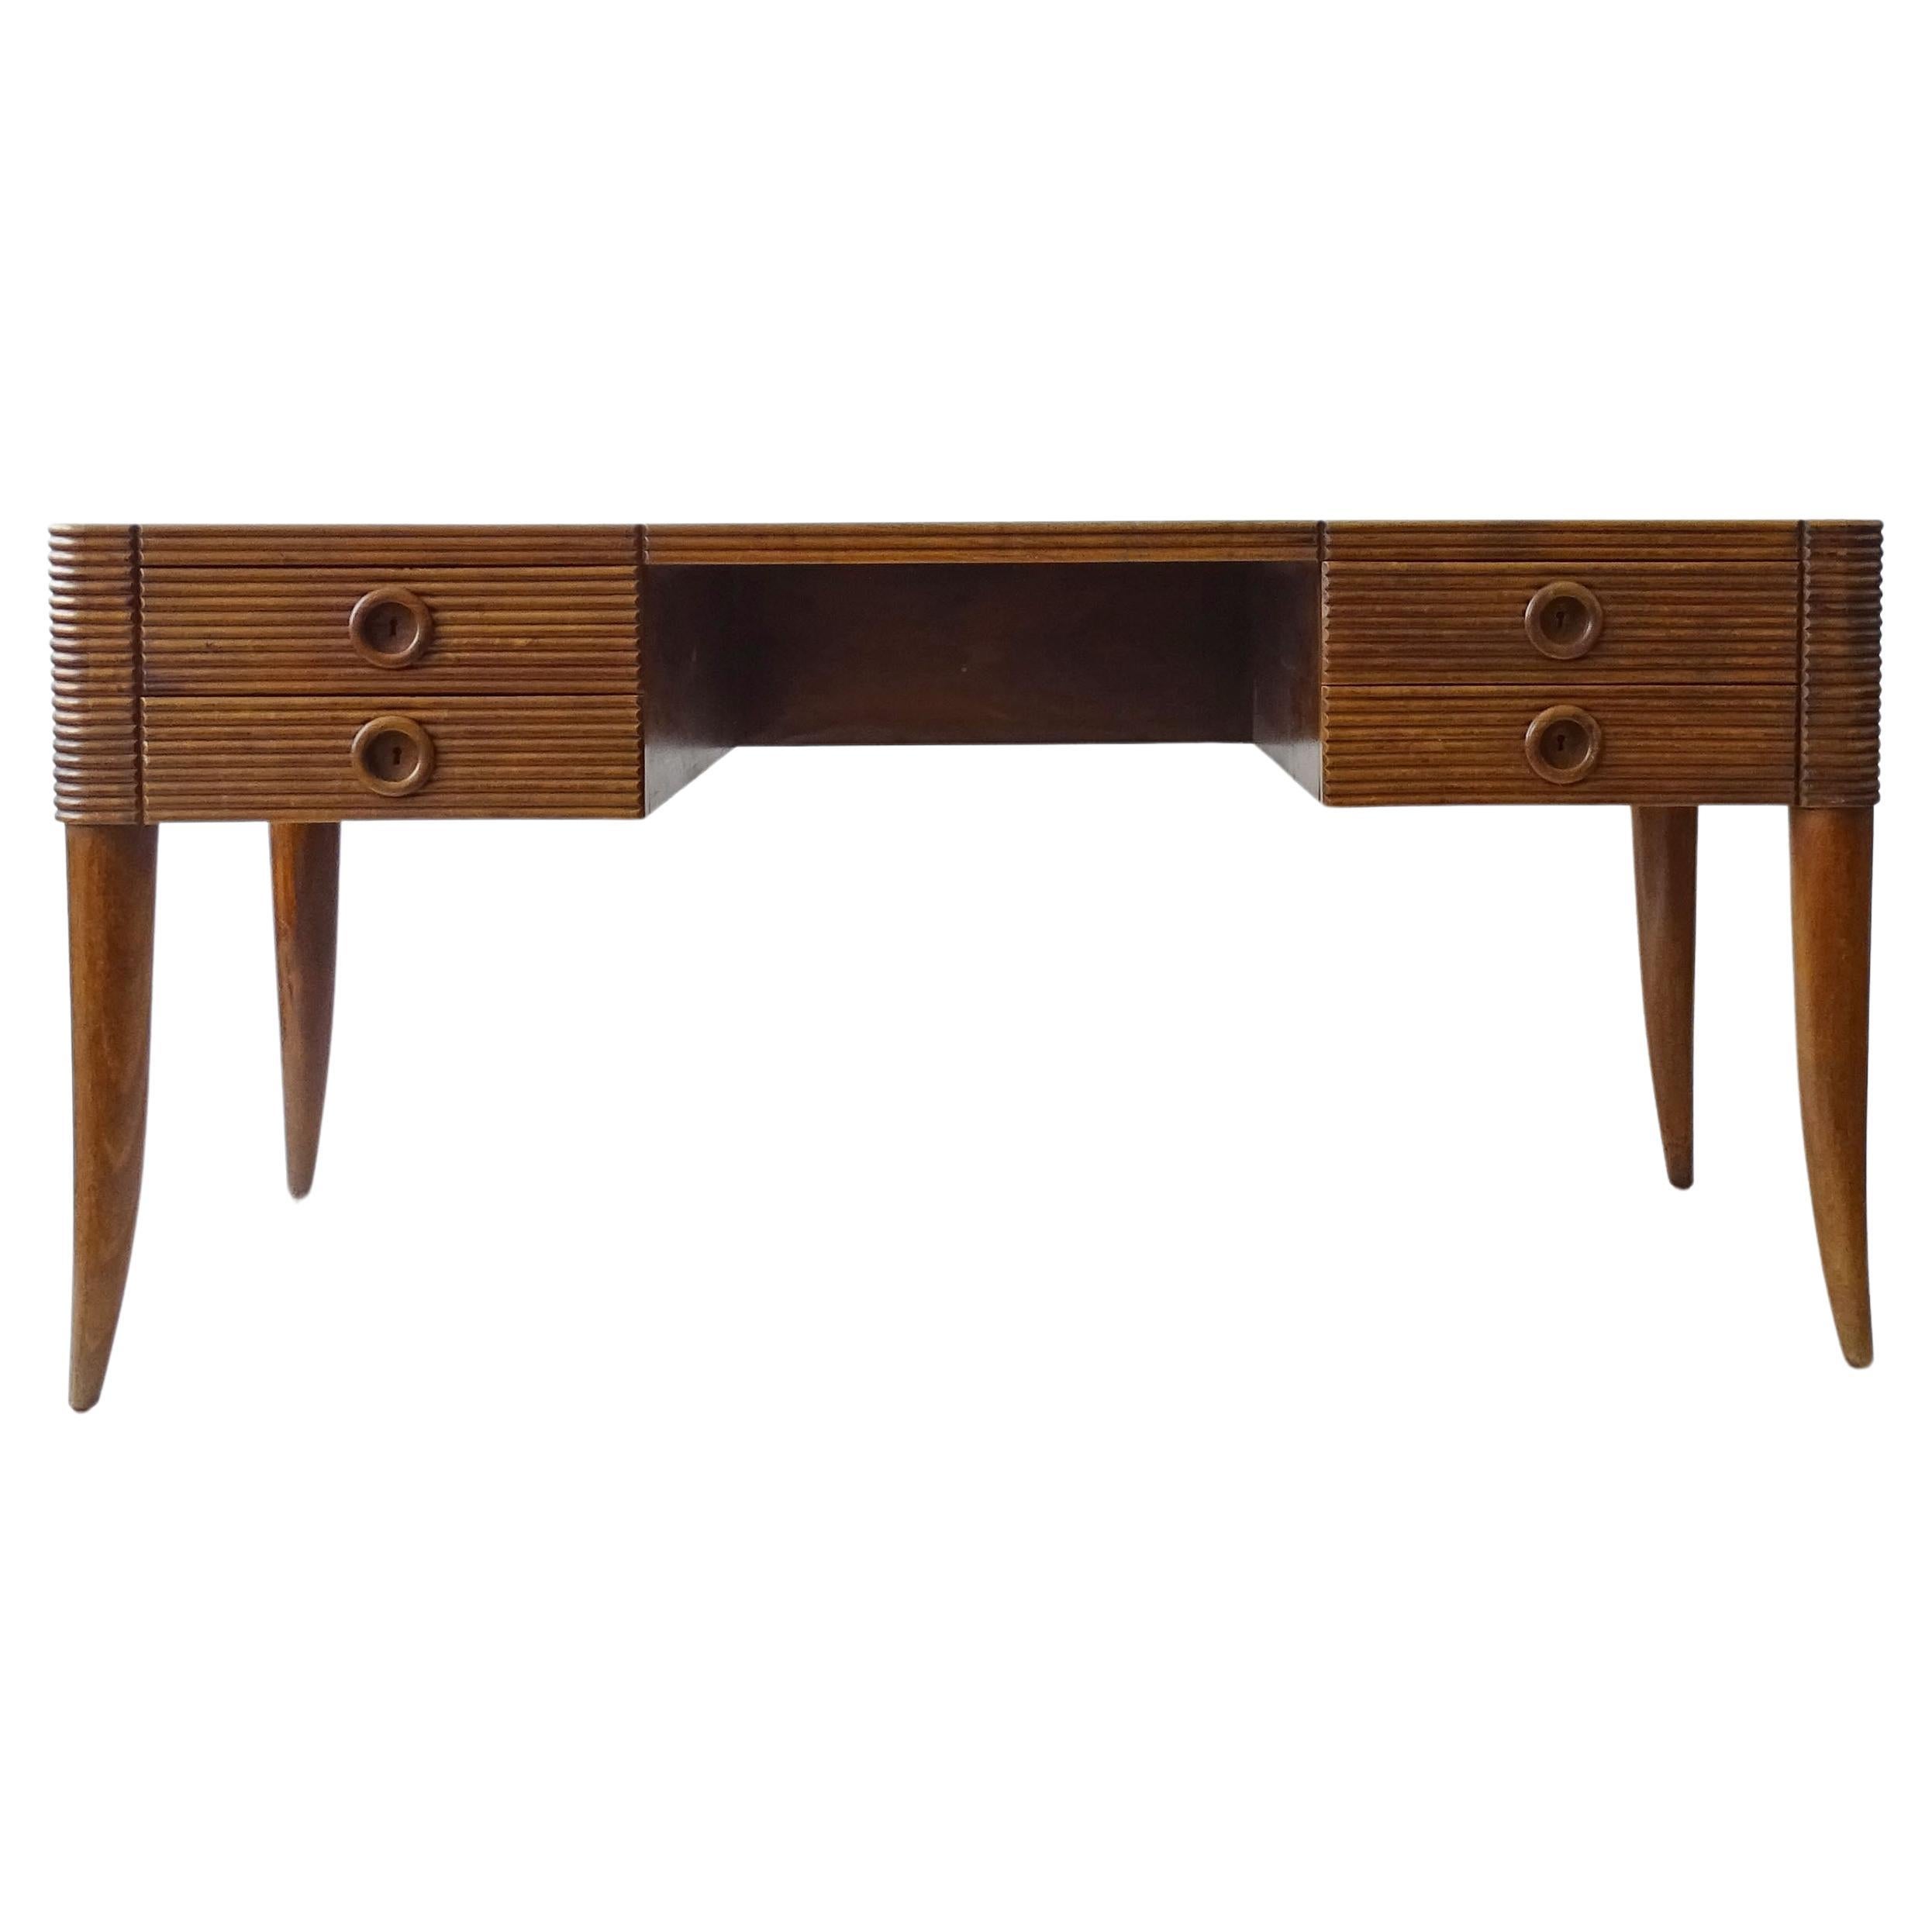 Paolo Buffa grissinato wood desk with four drawers, Italy 1940s